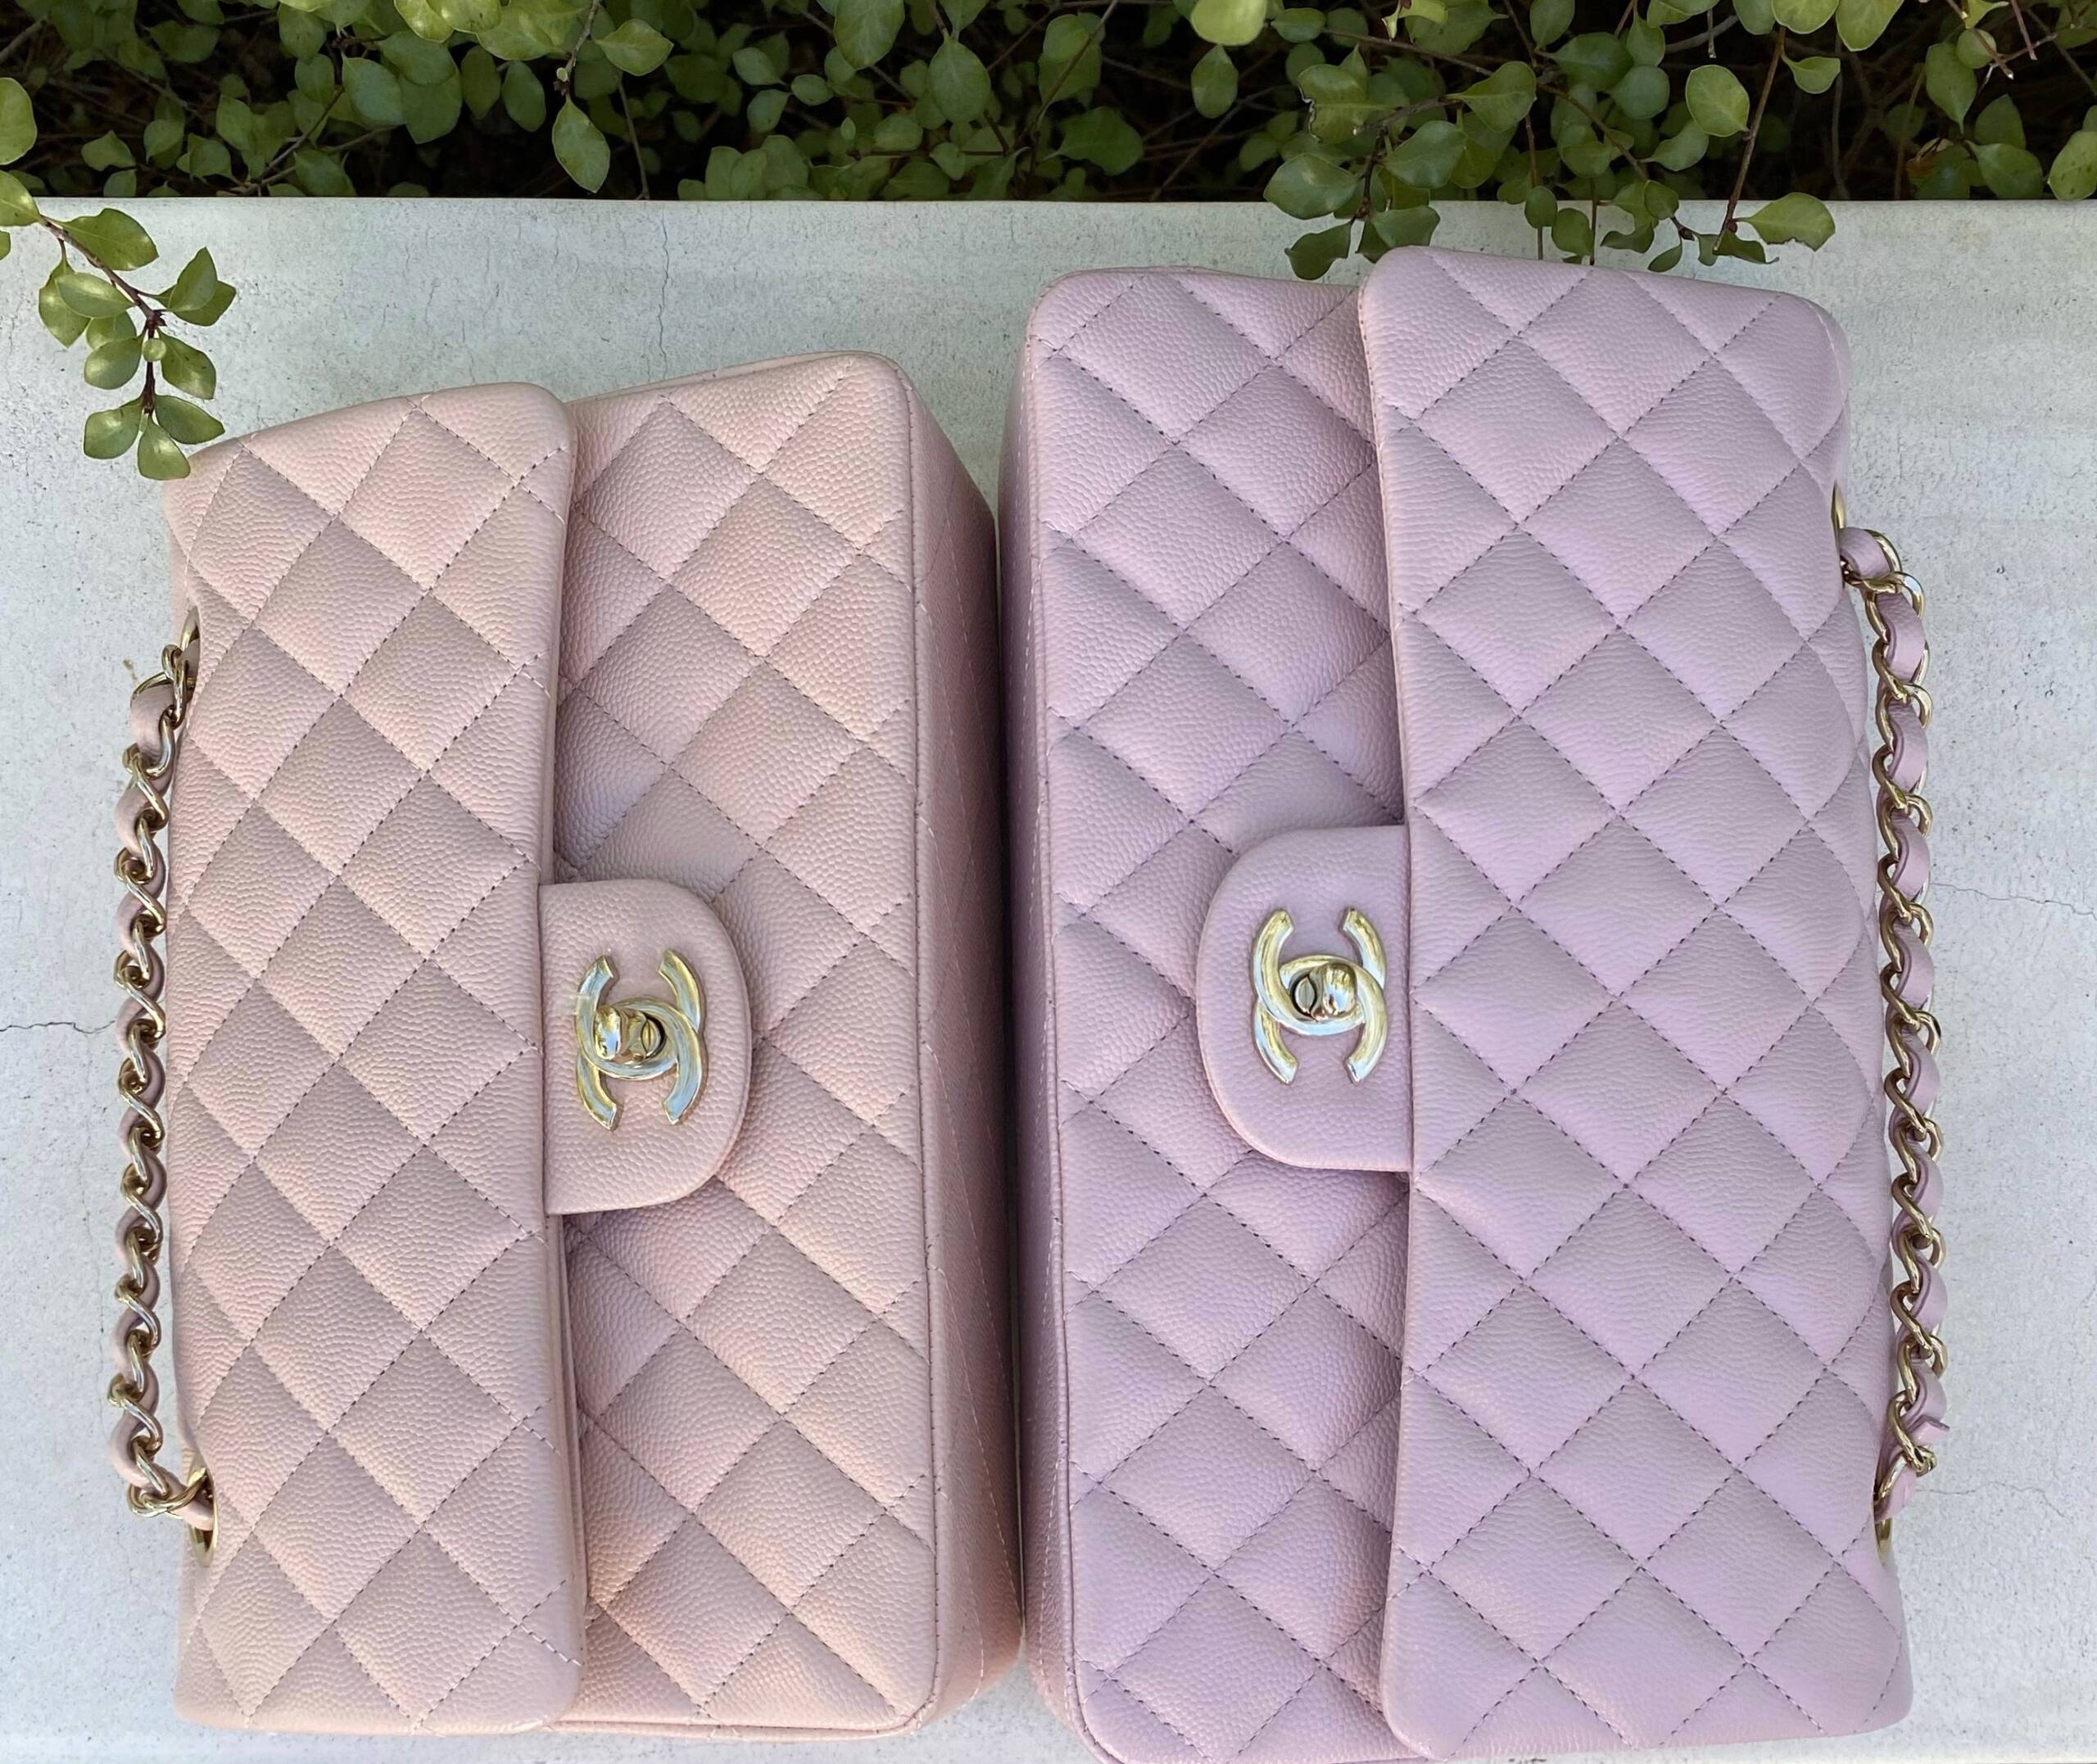 Buy the Chanel 22C Pink or Wait for the 22P Pink Flap? - PurseBop